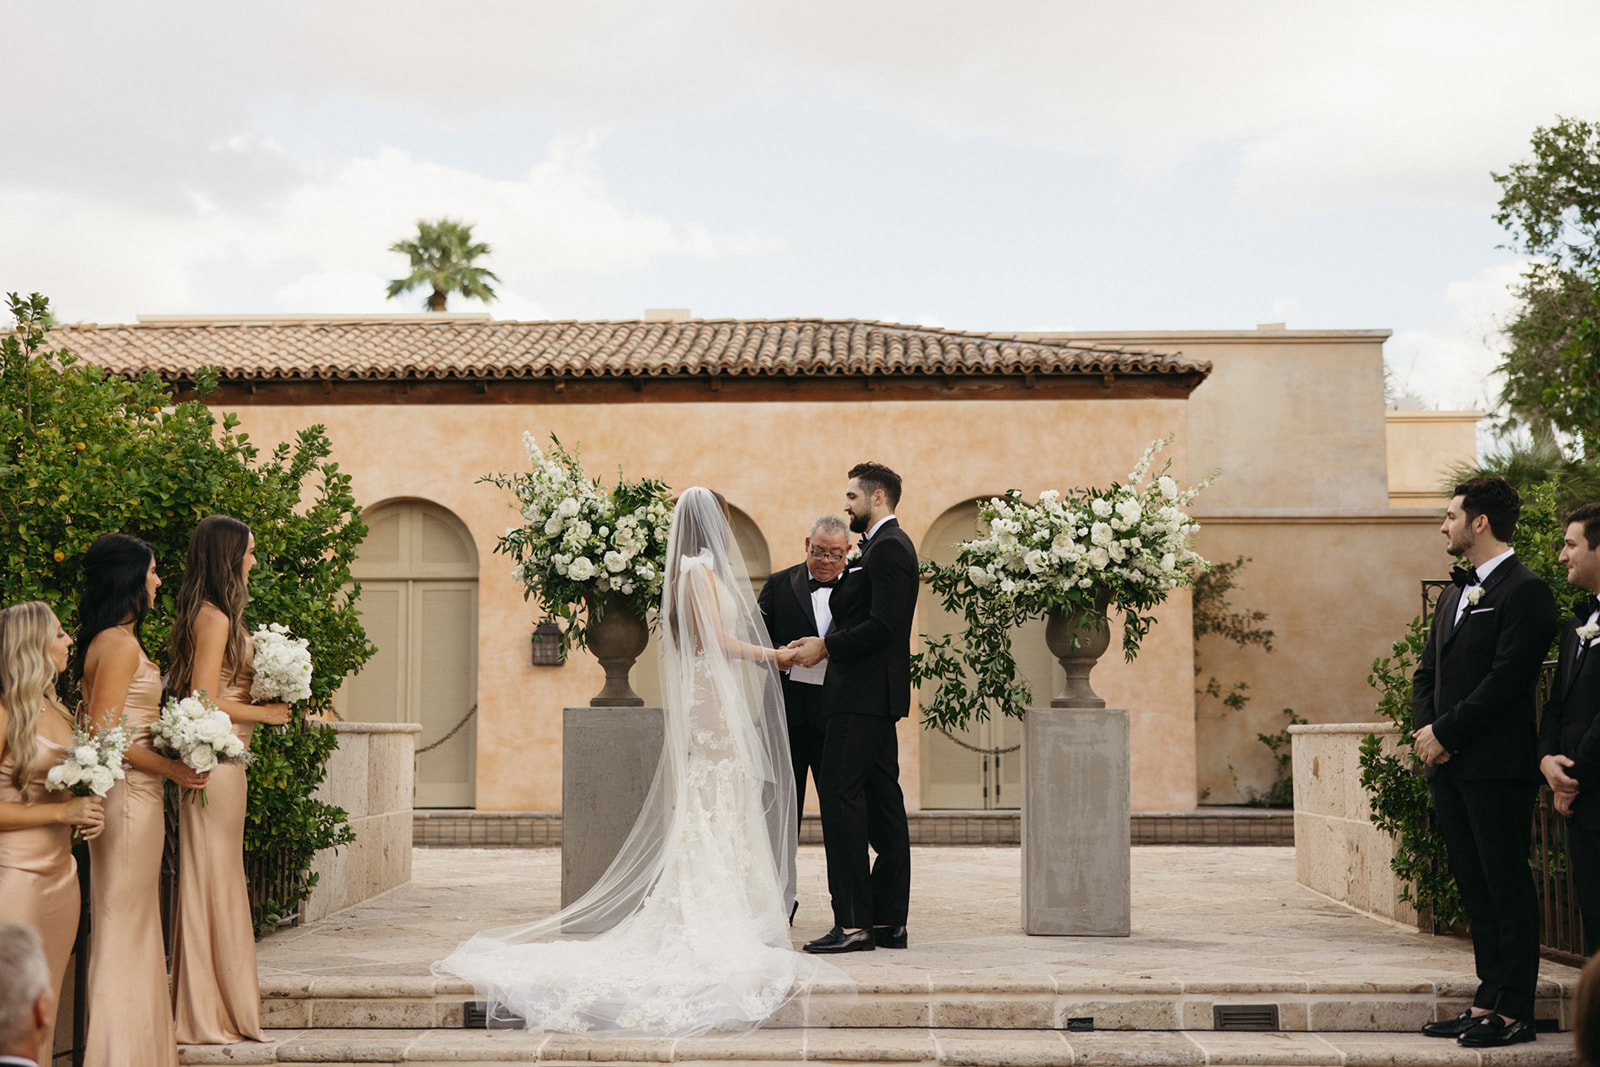 Bride and groom at outdoor wedding ceremony at Royal Palms up on steps between cement pillars with large white floral arrangements framing them with officiant behind them and bridesmaids and groomsmen to their respective sides.